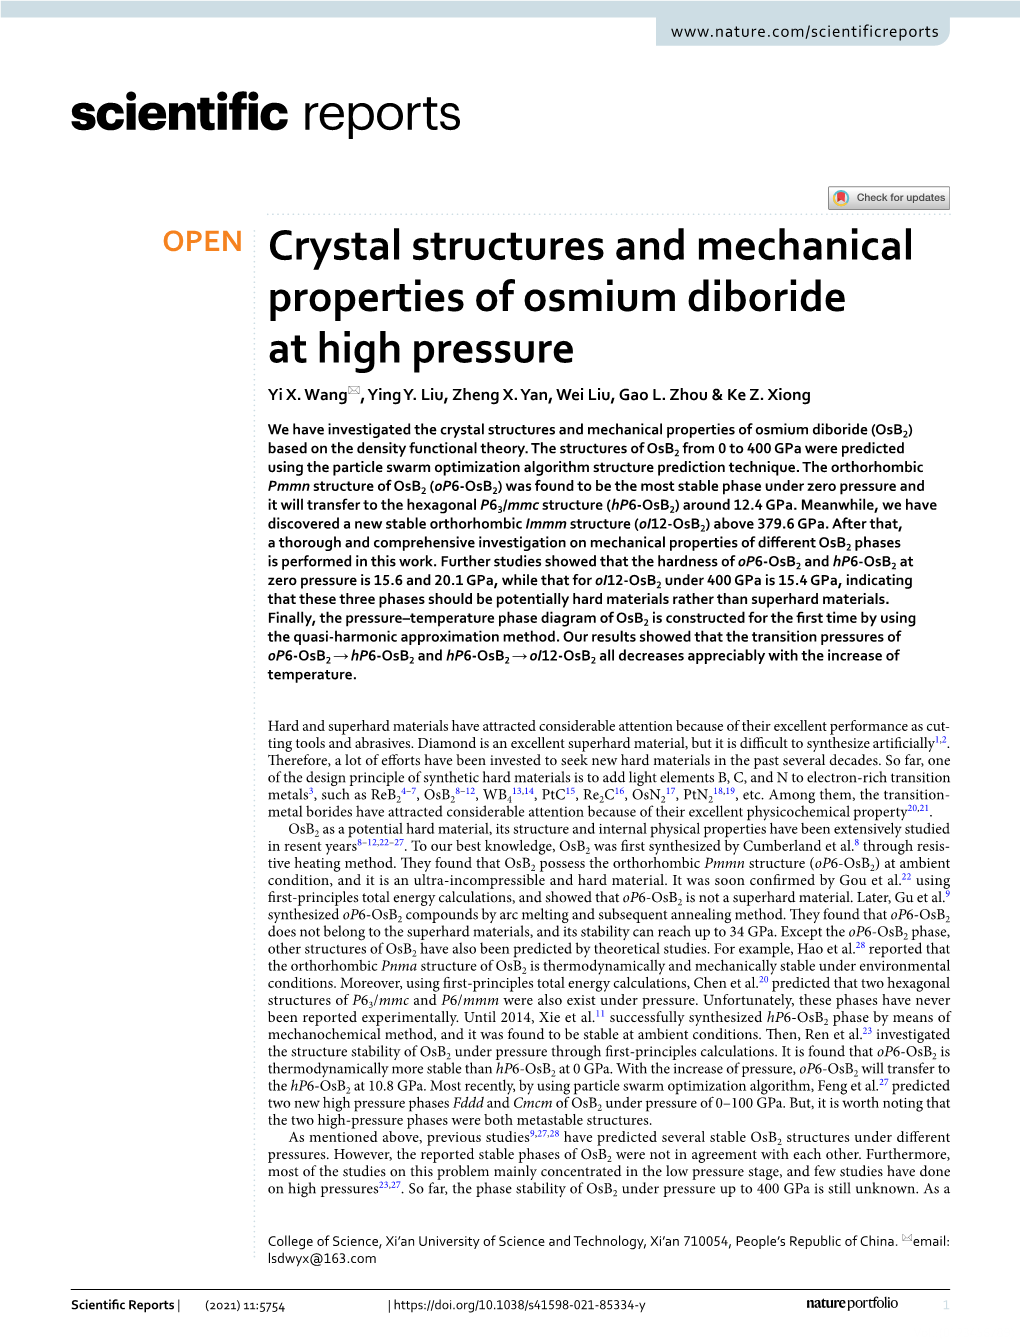 Crystal Structures and Mechanical Properties of Osmium Diboride at High Pressure Yi X